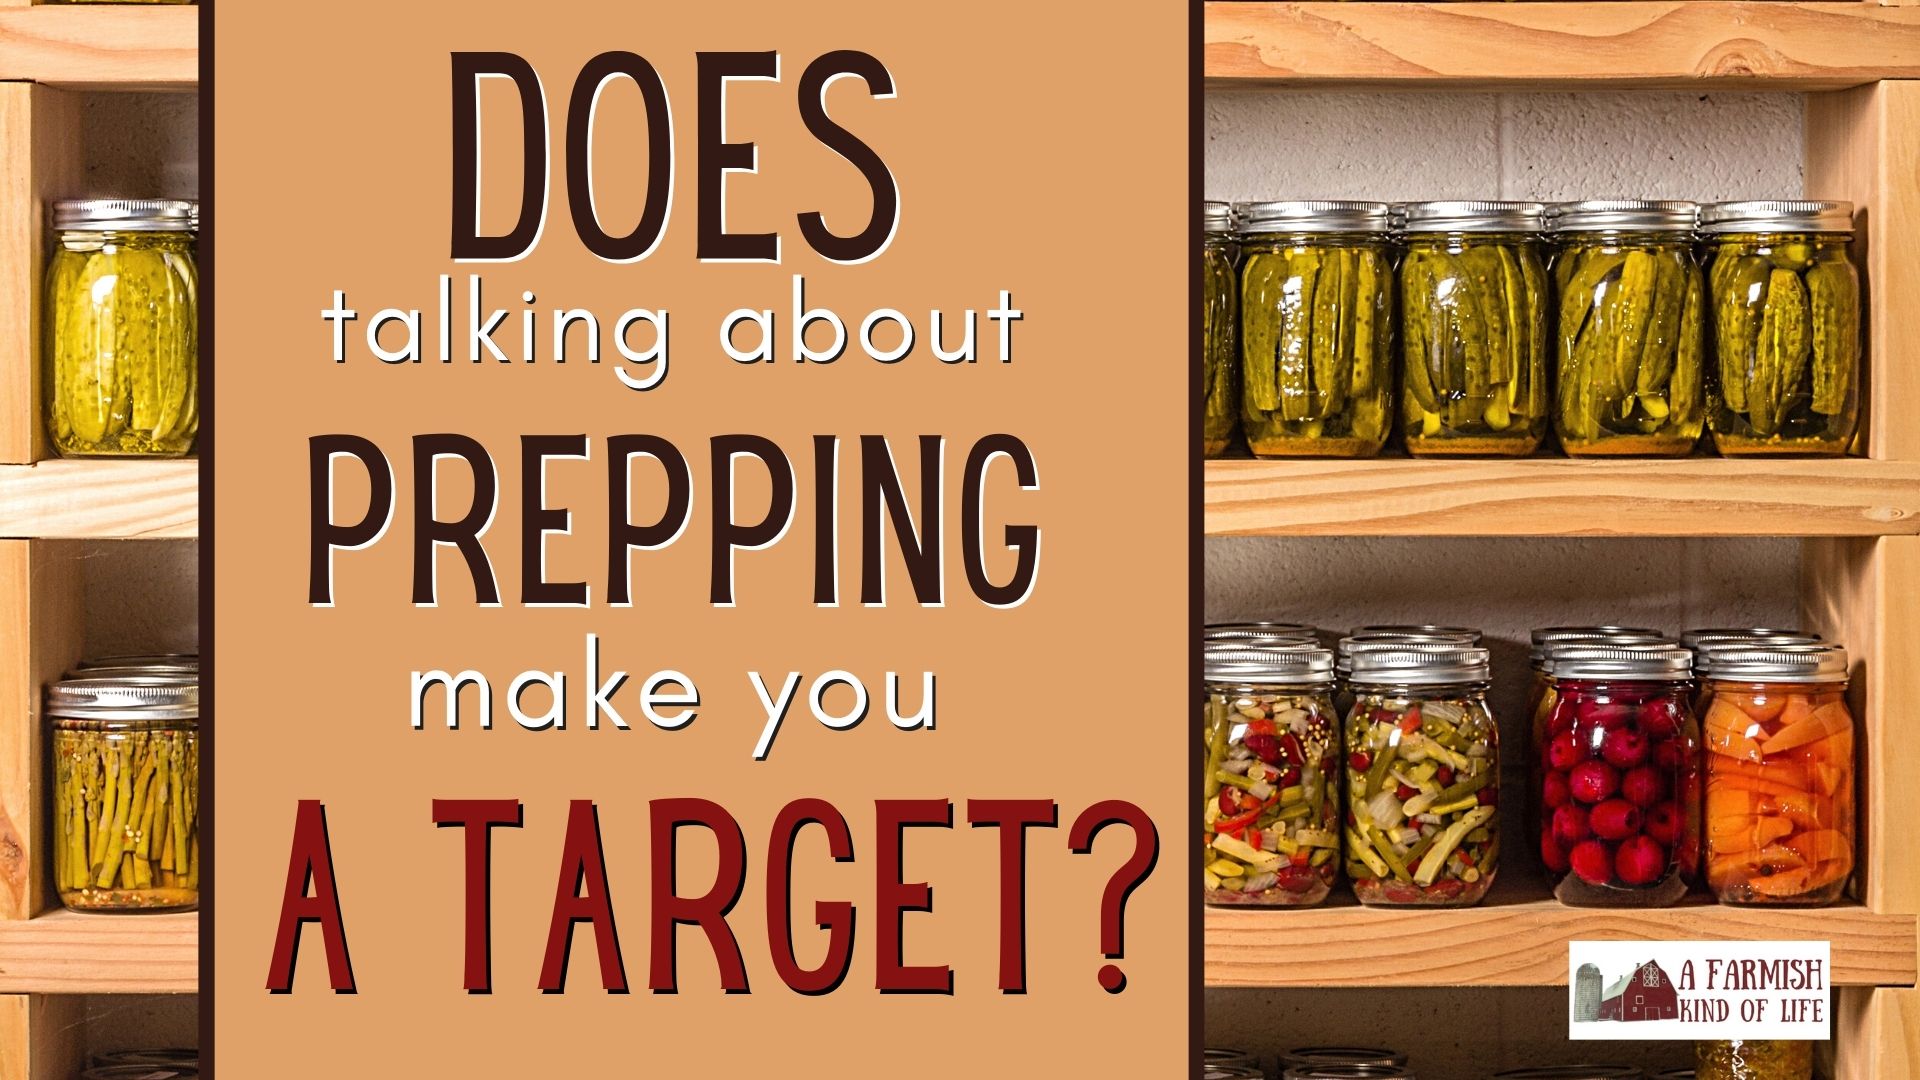 192: Does Prepping Make You a Target?